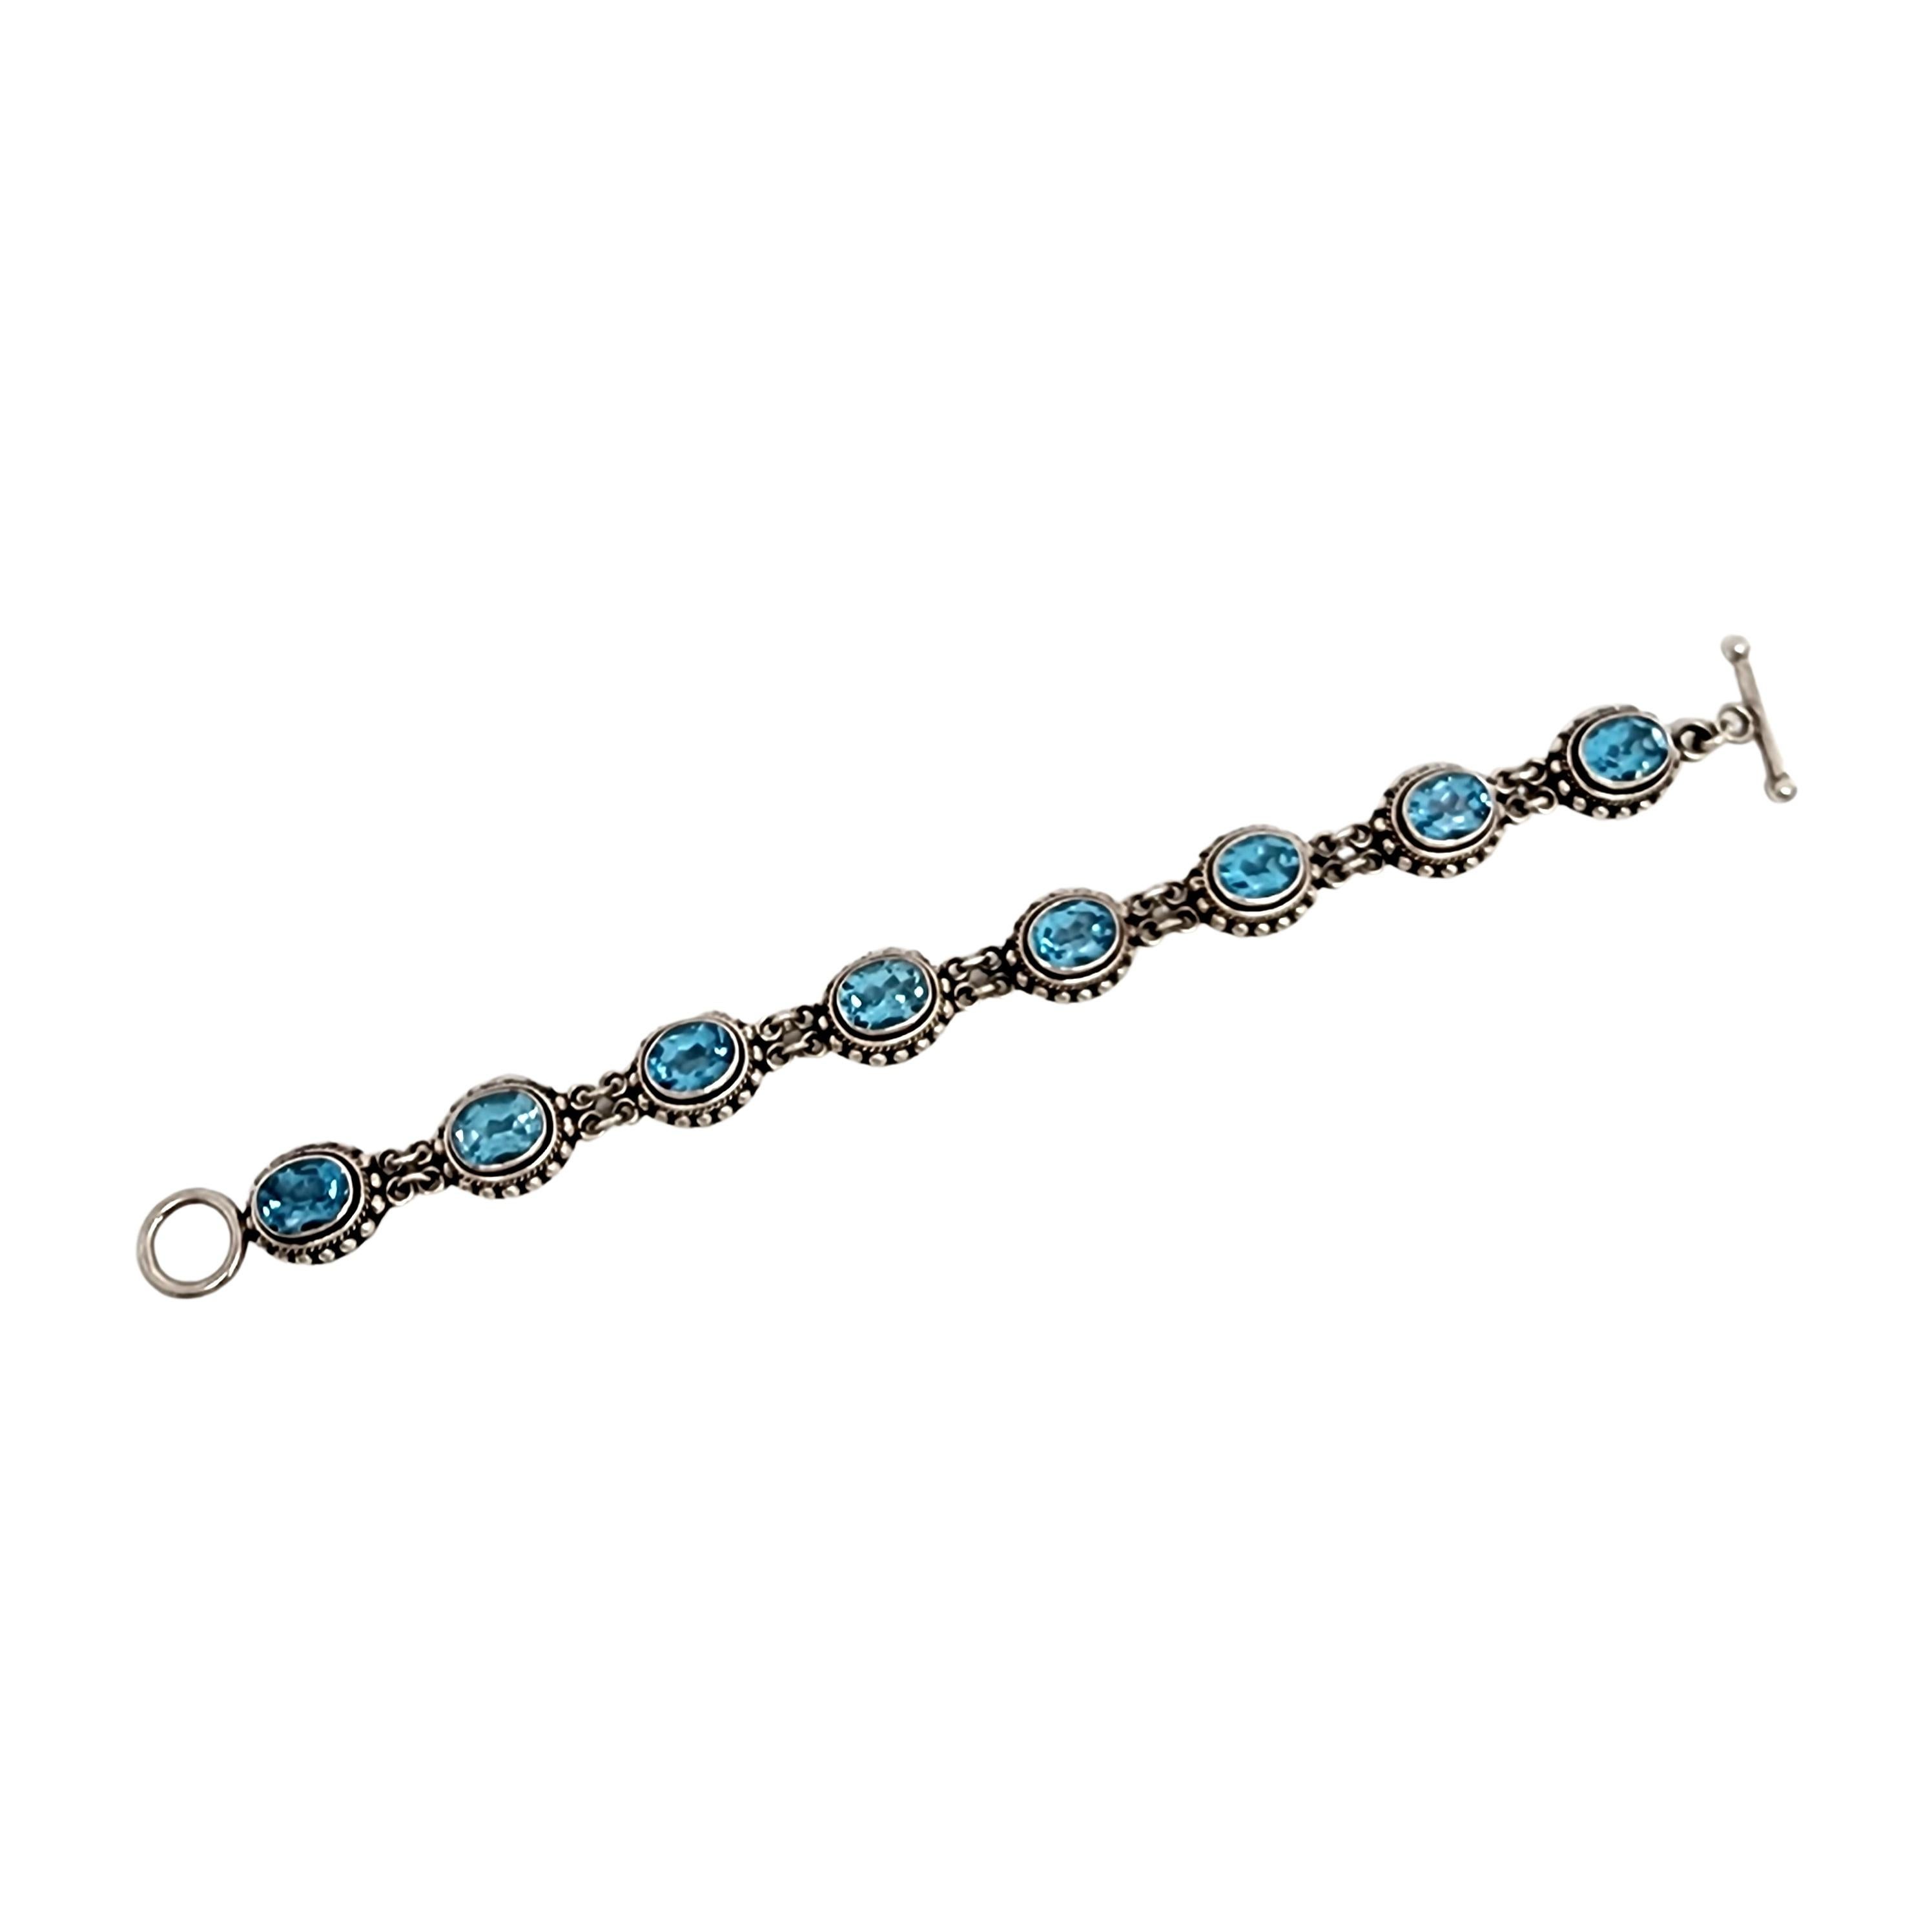 Sterling silver and blue topaz toggle bracelet and earrings set by Suarti.

Beautiful oval link bracelet and matching earrings  featuring bezel set blue topaz stones surrounded by rope and beaded designs. Bracelet features a toggle